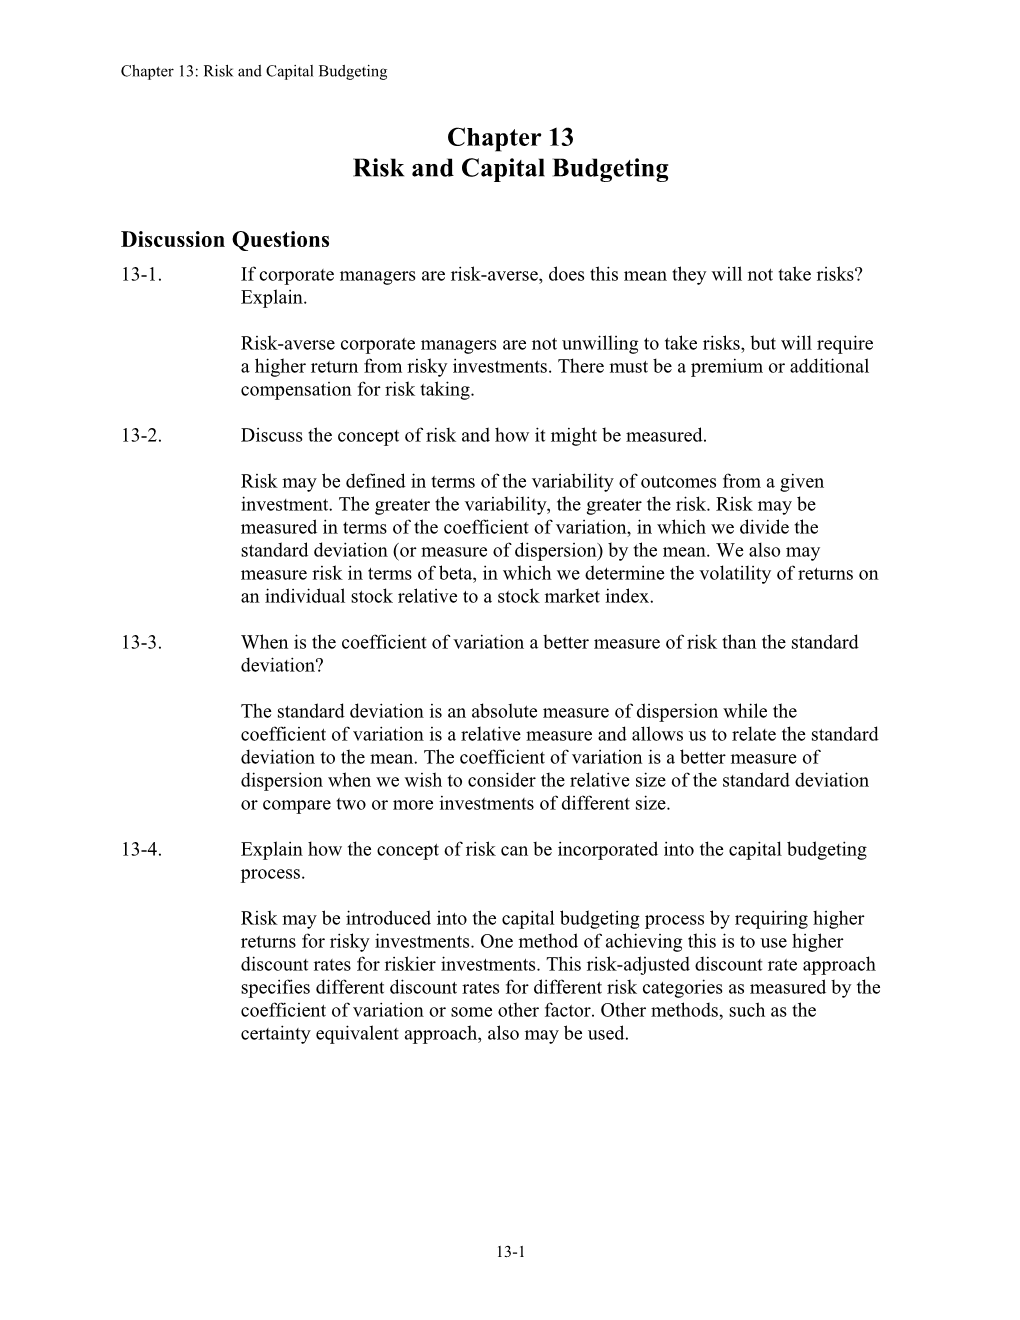 Risk and Capital Budgeting